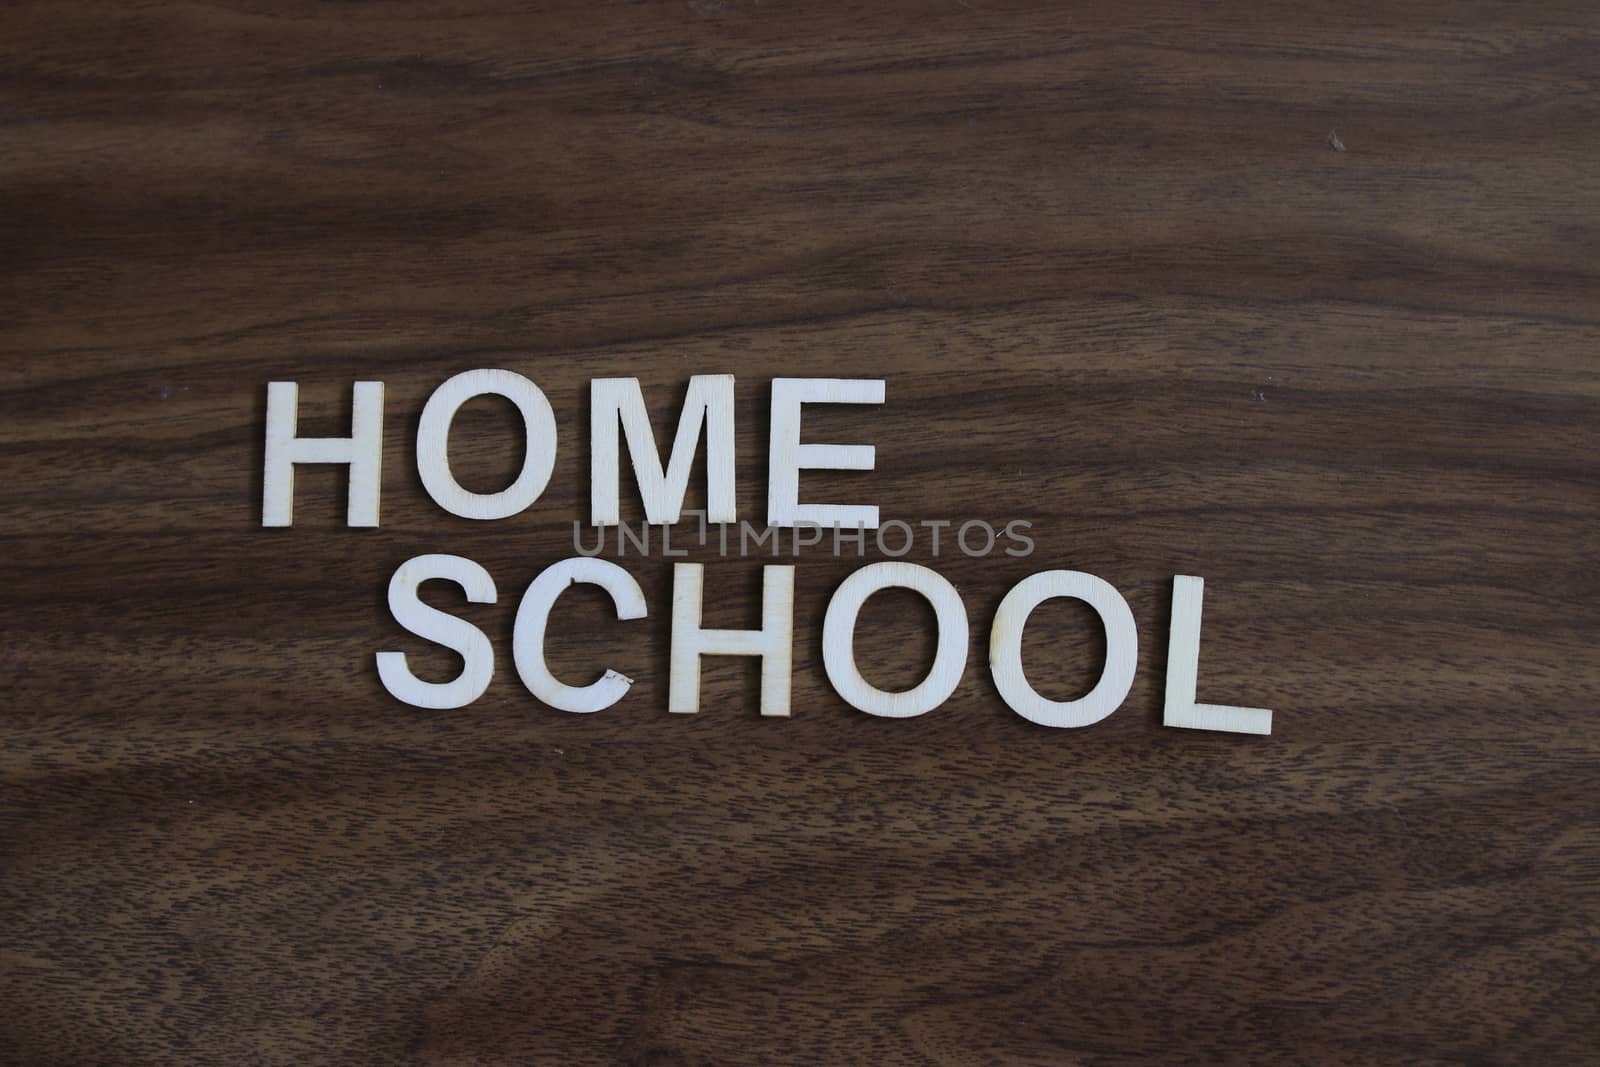 Home school theme images. concept of parents home schooling due to covid by mynewturtle1